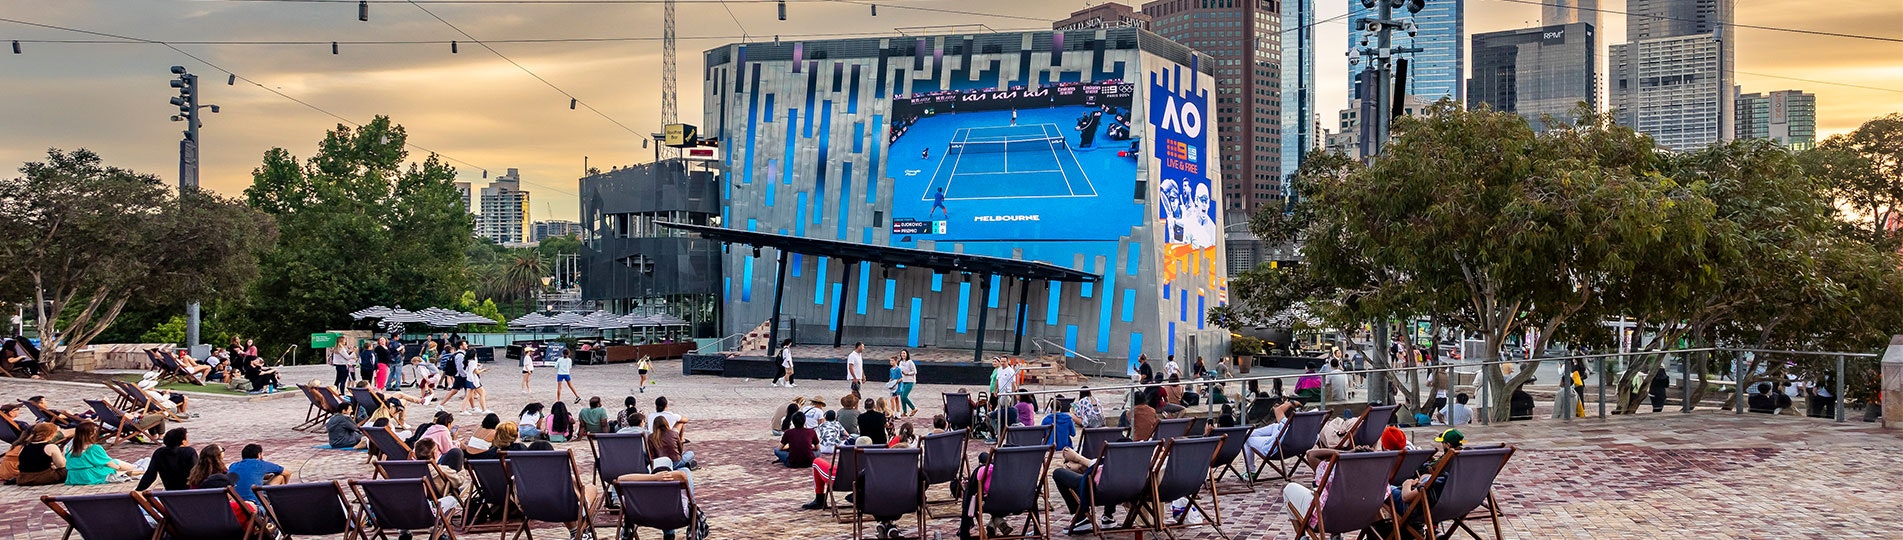 A photo from behind of a crowd of people sitting on deck chairs in Fed Square watching the Australian Open on the Big Screen